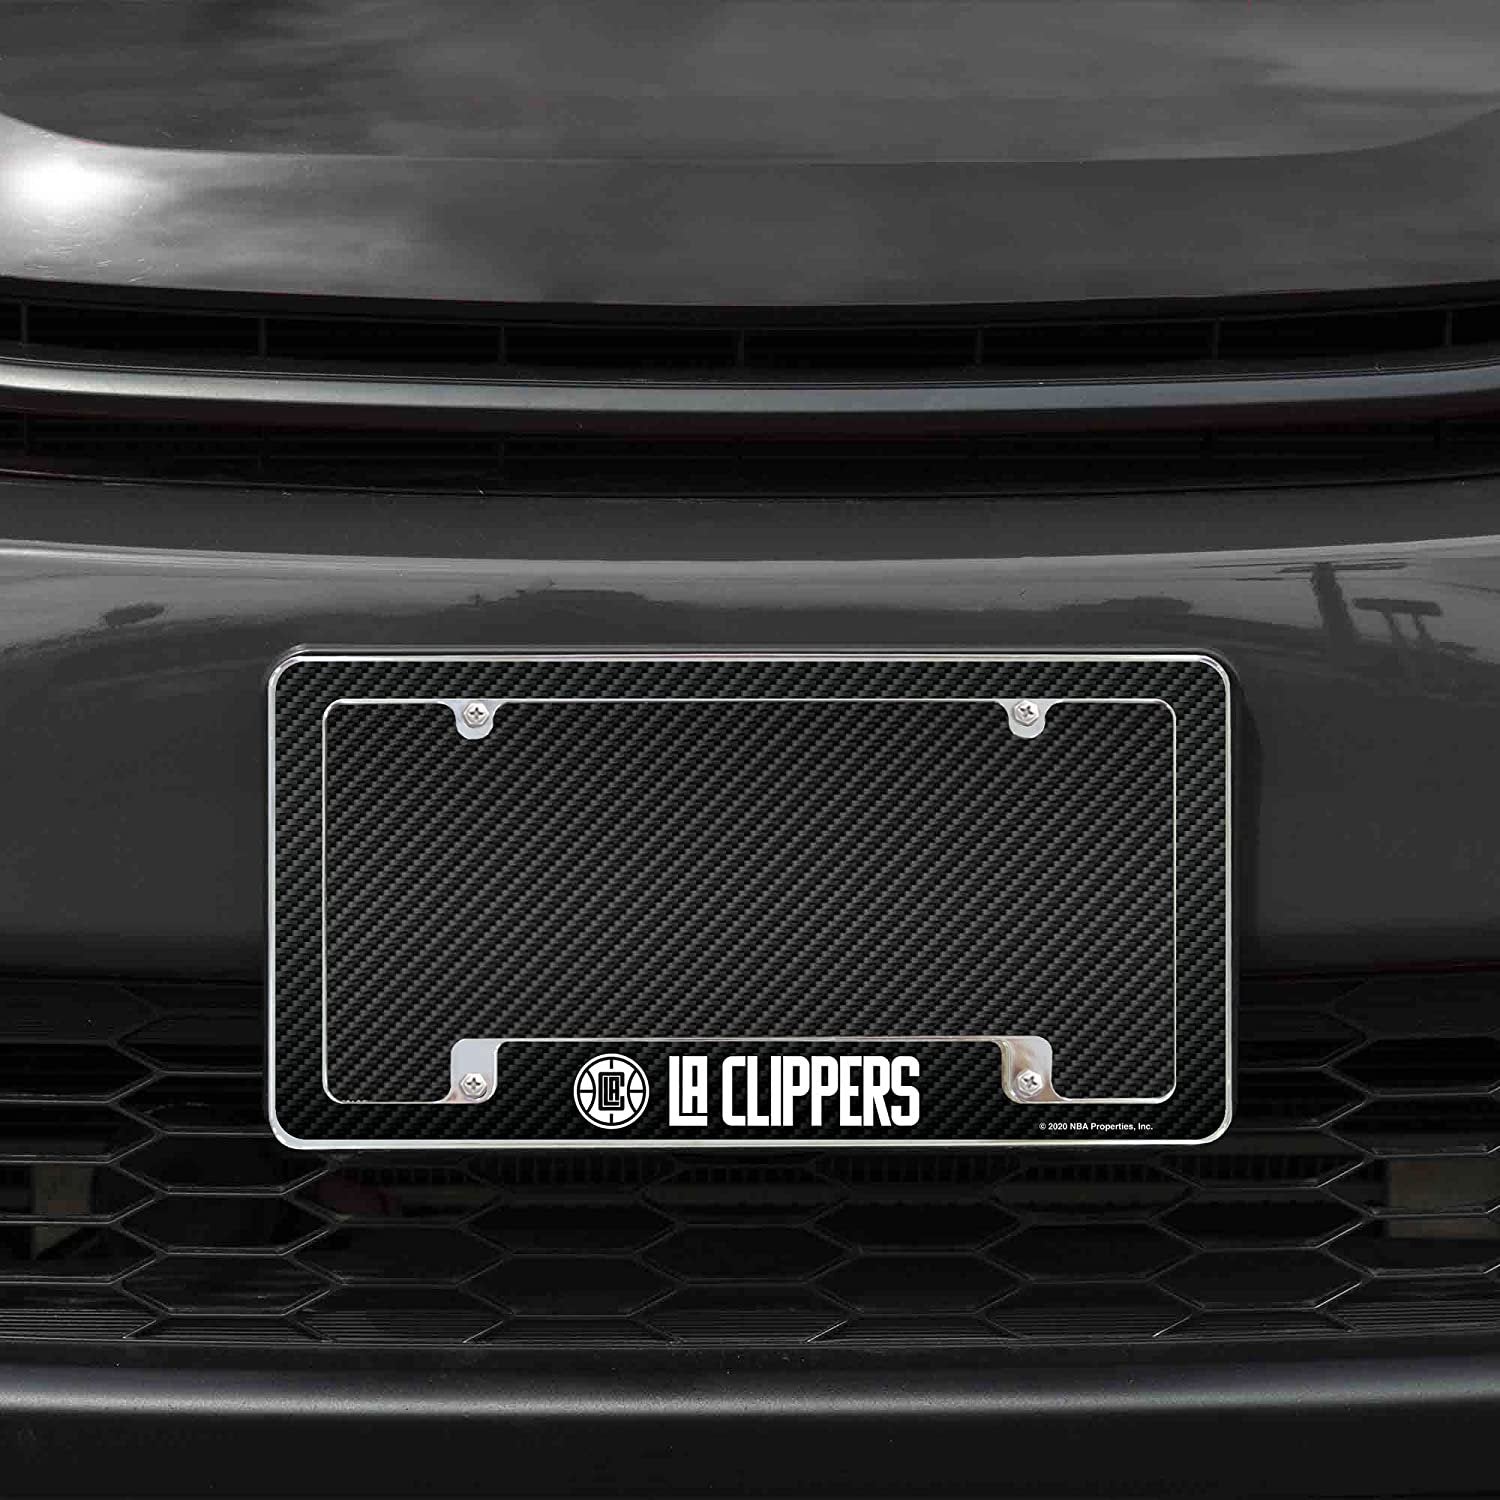 Los Angeles Clippers Metal License Plate Frame Chrome Tag Cover Carbon Fiber Design 6x12 Inch